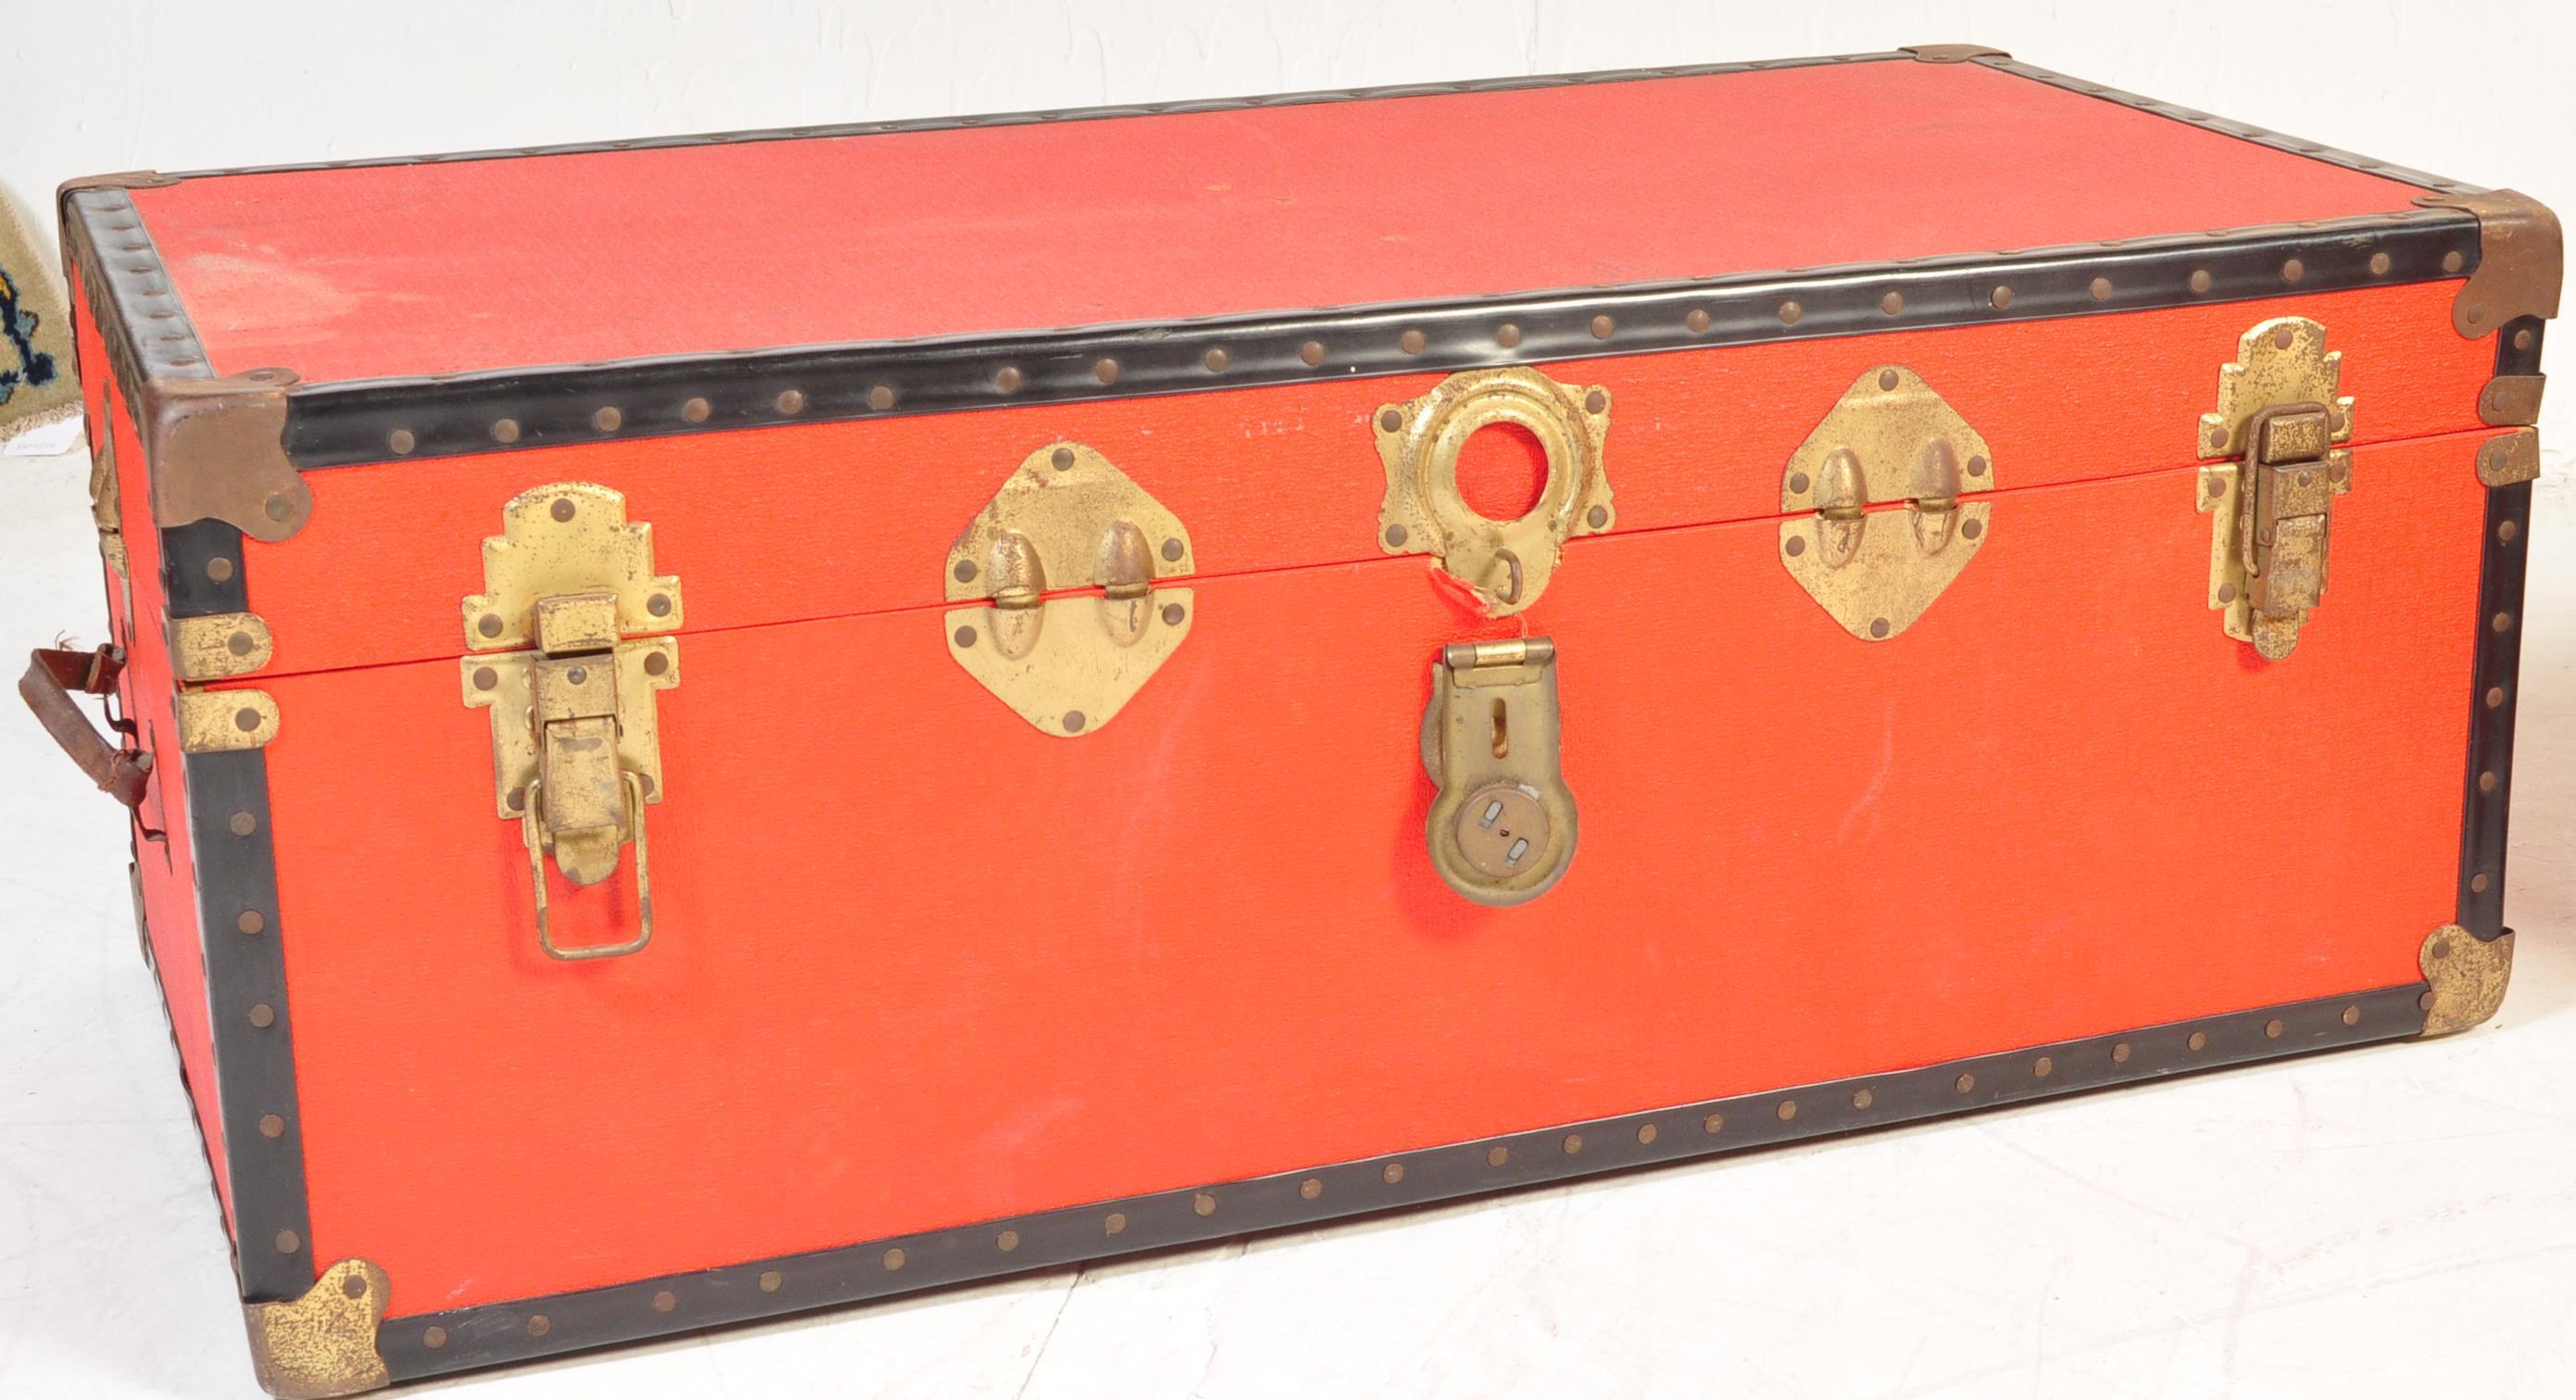 COLLECTION OF 3 20TH CENTURY RED STEAMER SHIPPING TRUNKS - Image 5 of 5